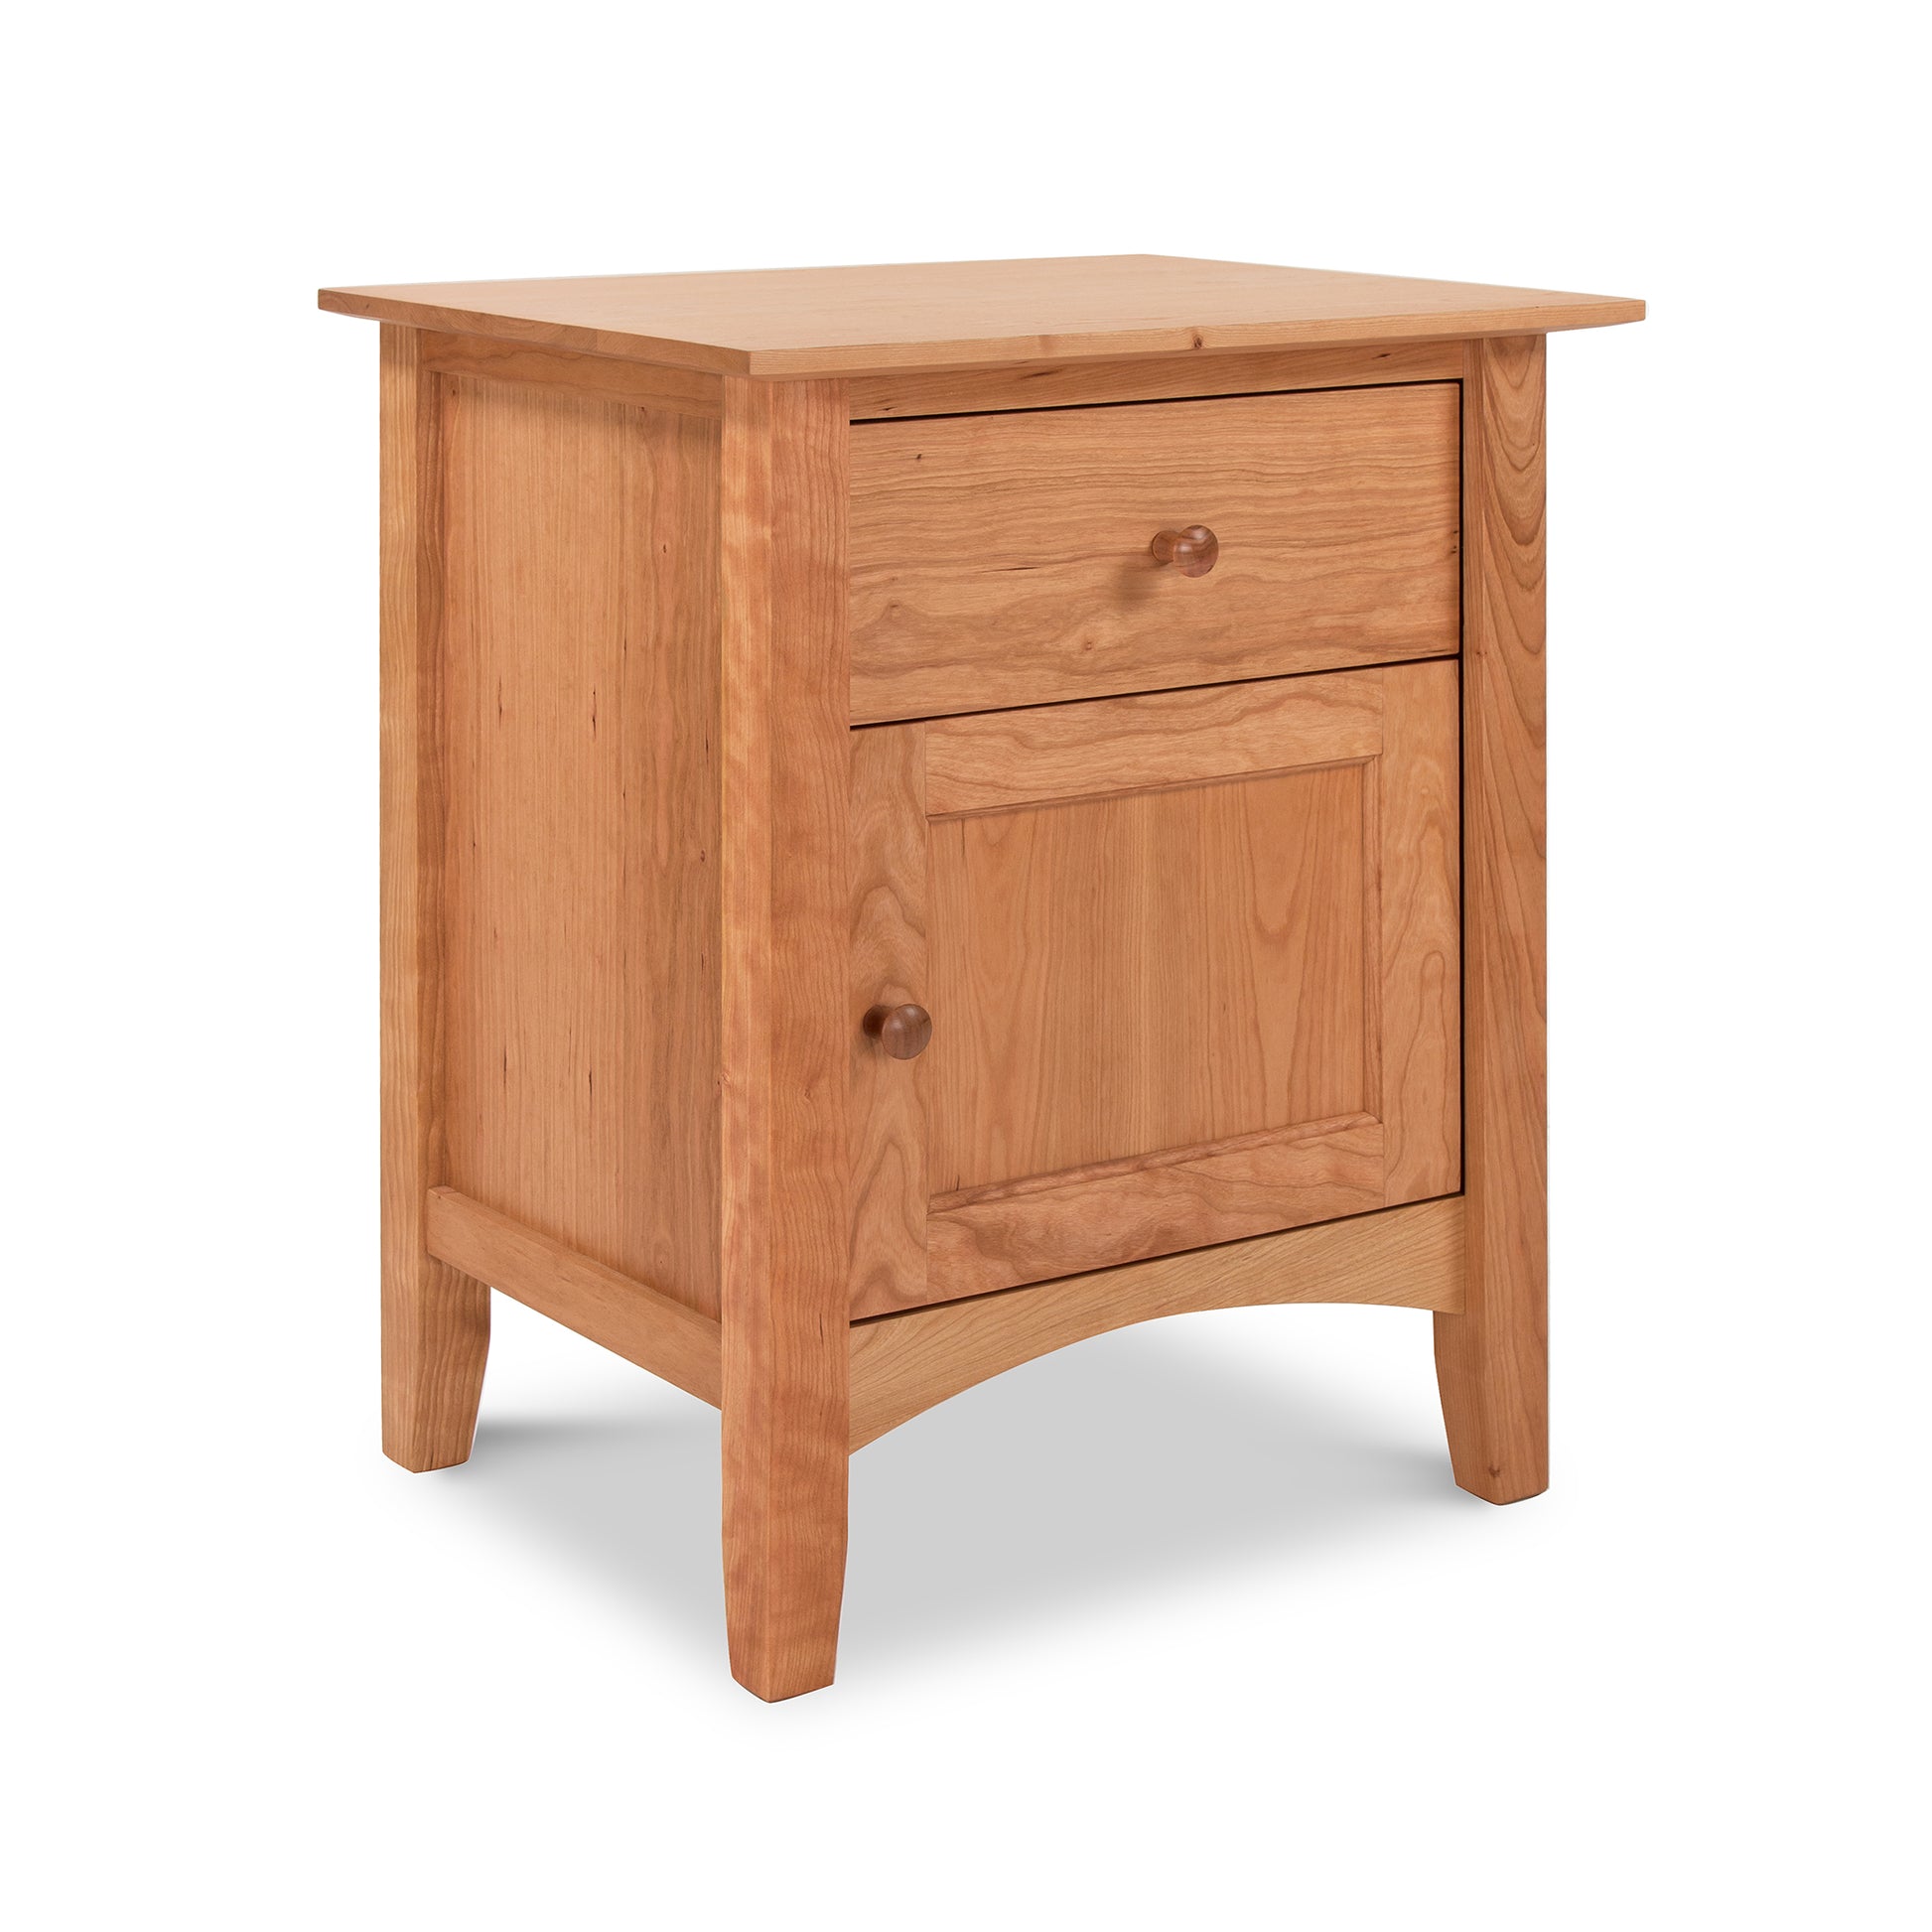 A American Shaker 1-Drawer Nightstand with Door, handcrafted with Vermont craftsmanship in natural cherry by Maple Corner Woodworks.